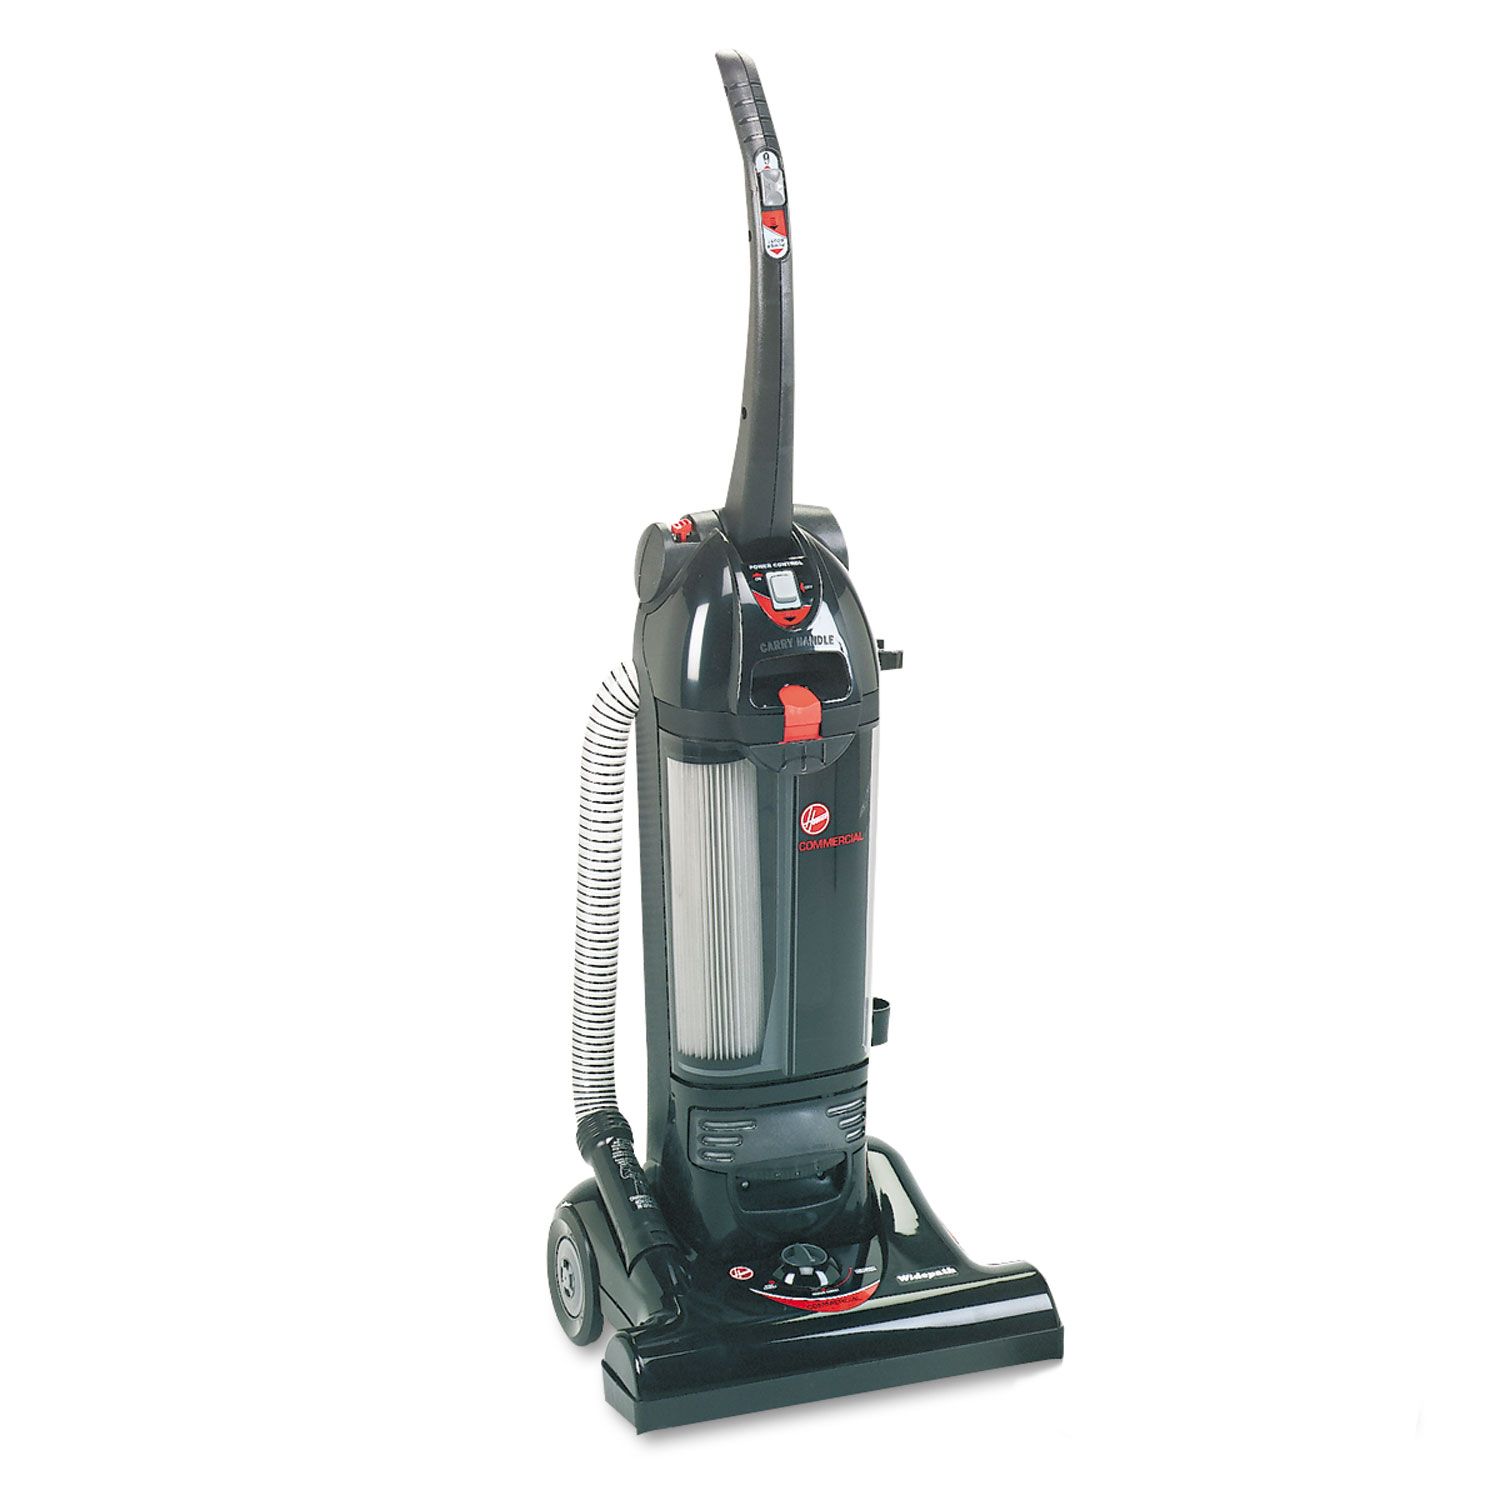  Hoover Commercial C1660900 Hush Bagless Upright Vacuum, 15 Cleaning Path (HVRC1660900) 